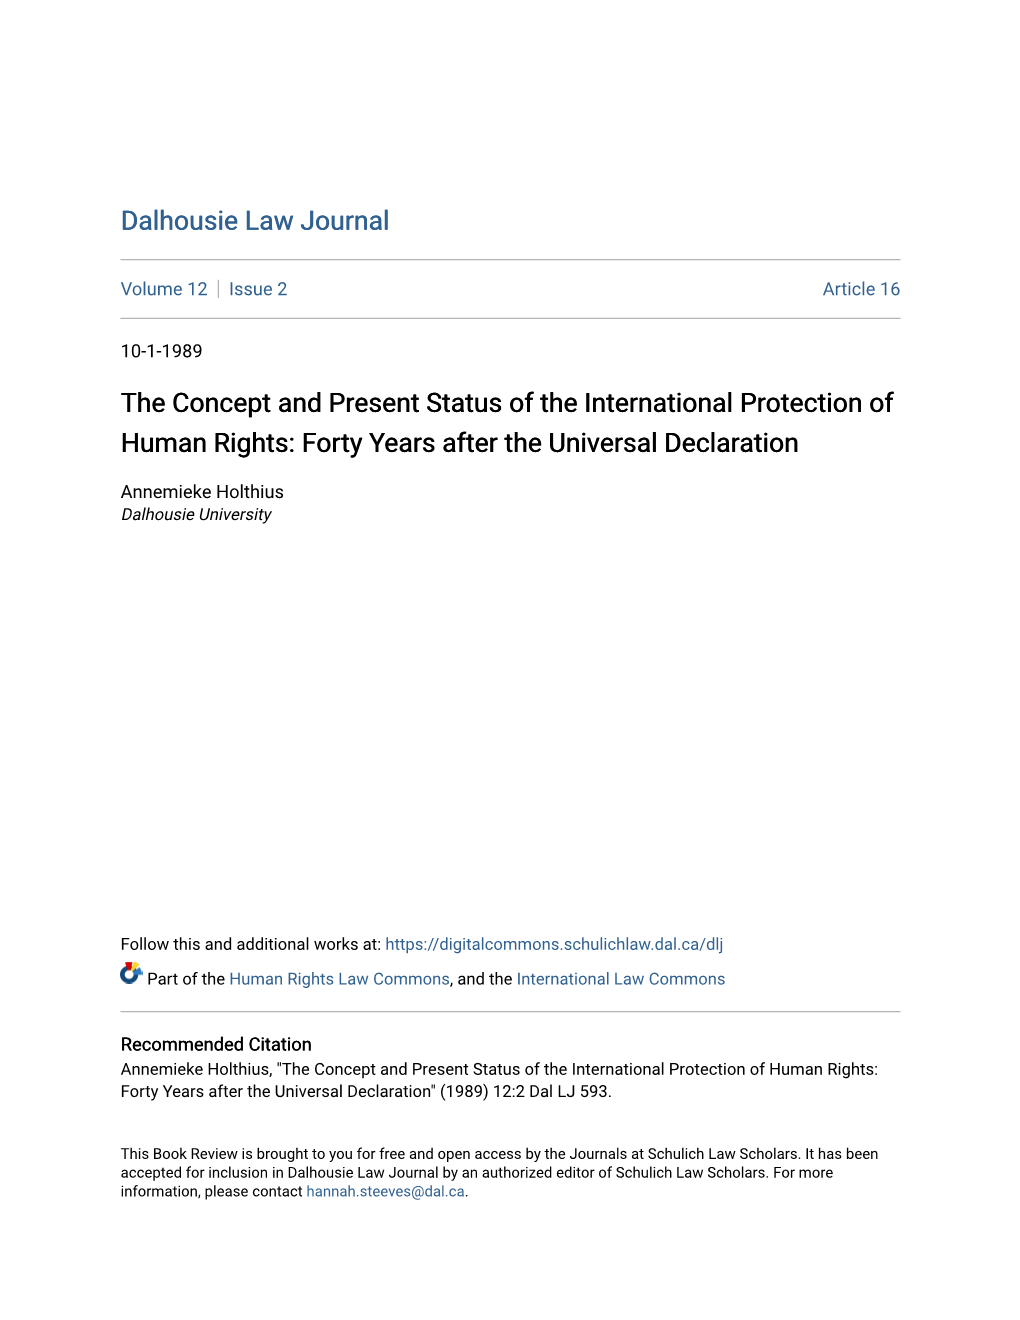 The Concept and Present Status of the International Protection of Human Rights: Forty Years After the Universal Declaration